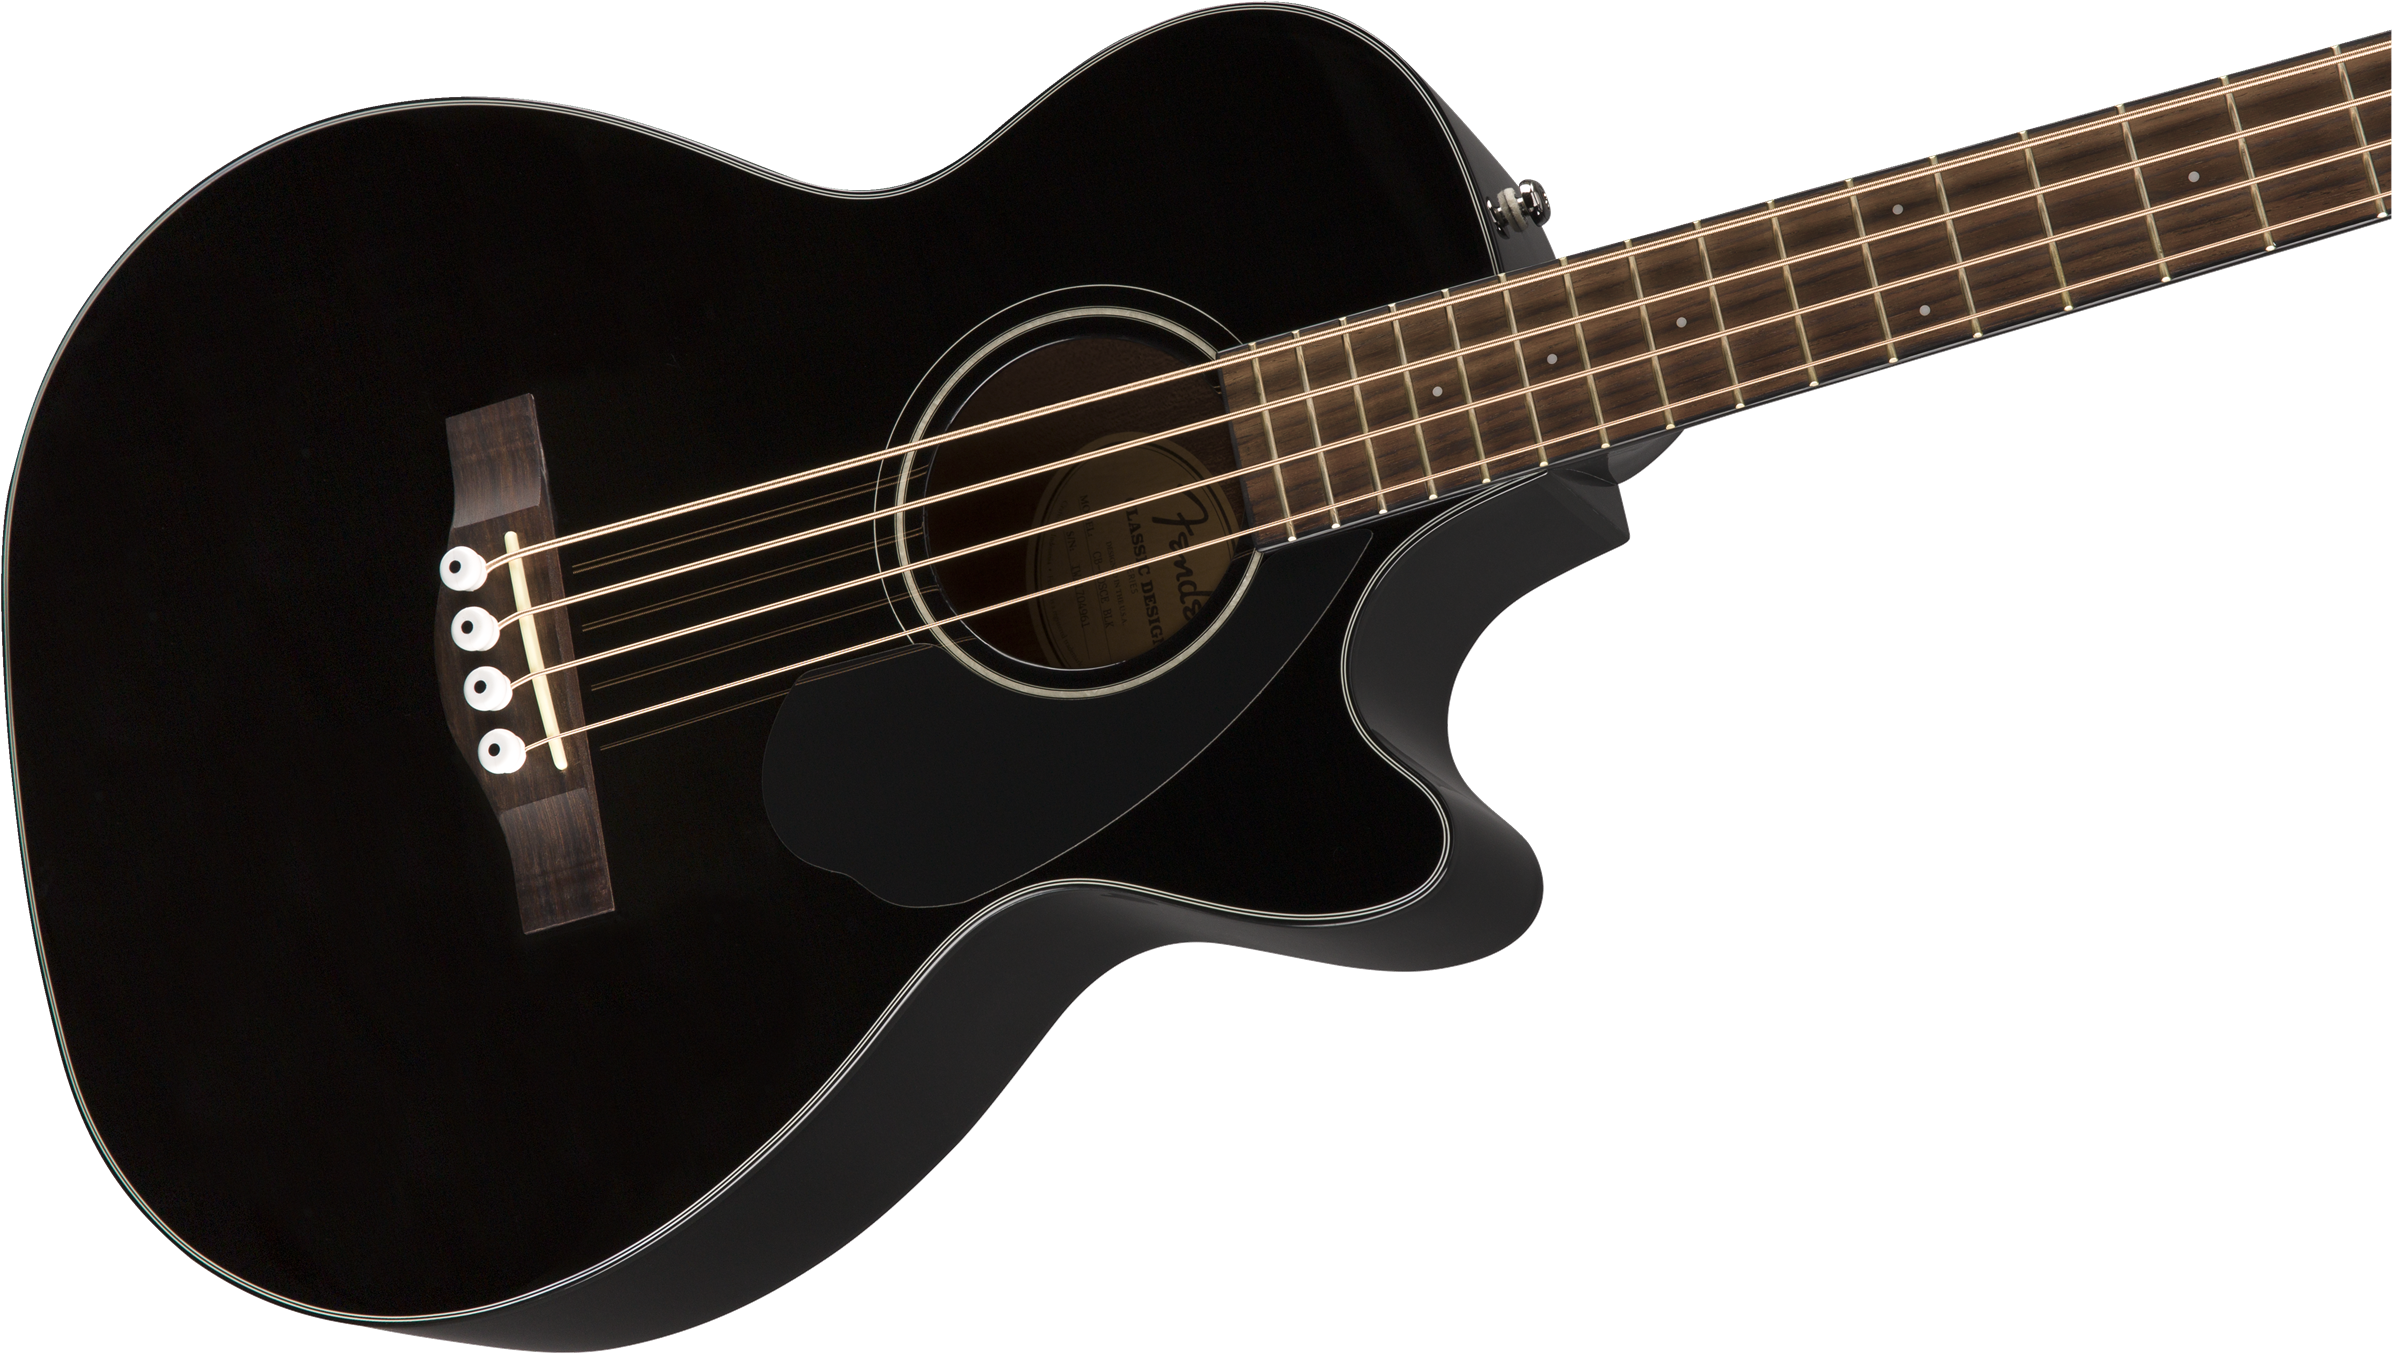 Fender CB-60sce Electric Acoustic Bass Guitar in Black